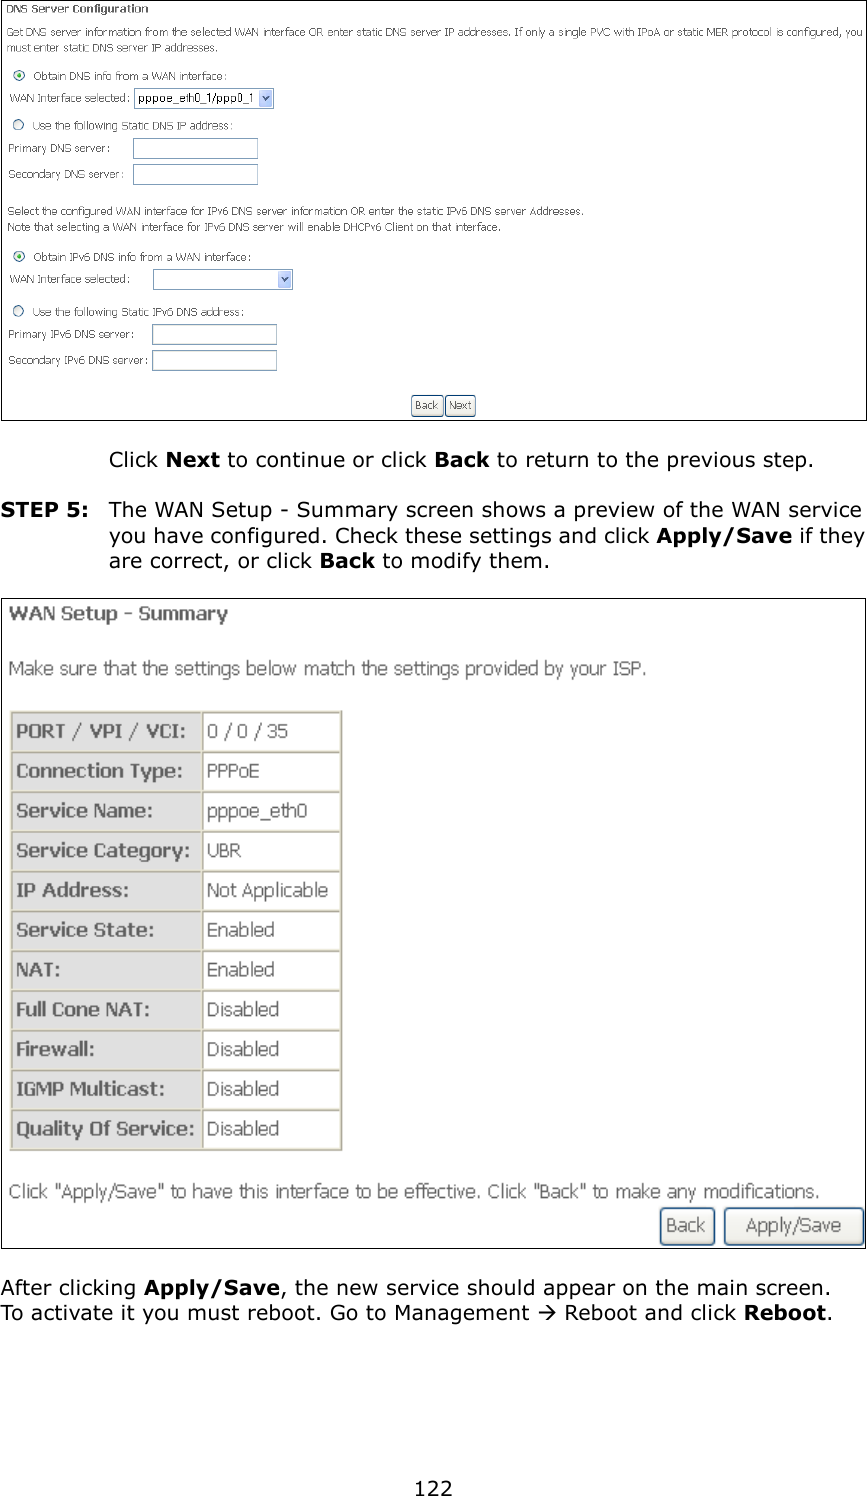   122     Click Next to continue or click Back to return to the previous step.  STEP 5:  The WAN Setup - Summary screen shows a preview of the WAN service you have configured. Check these settings and click Apply/Save if they are correct, or click Back to modify them.    After clicking Apply/Save, the new service should appear on the main screen.   To activate it you must reboot. Go to Management  Reboot and click Reboot. 